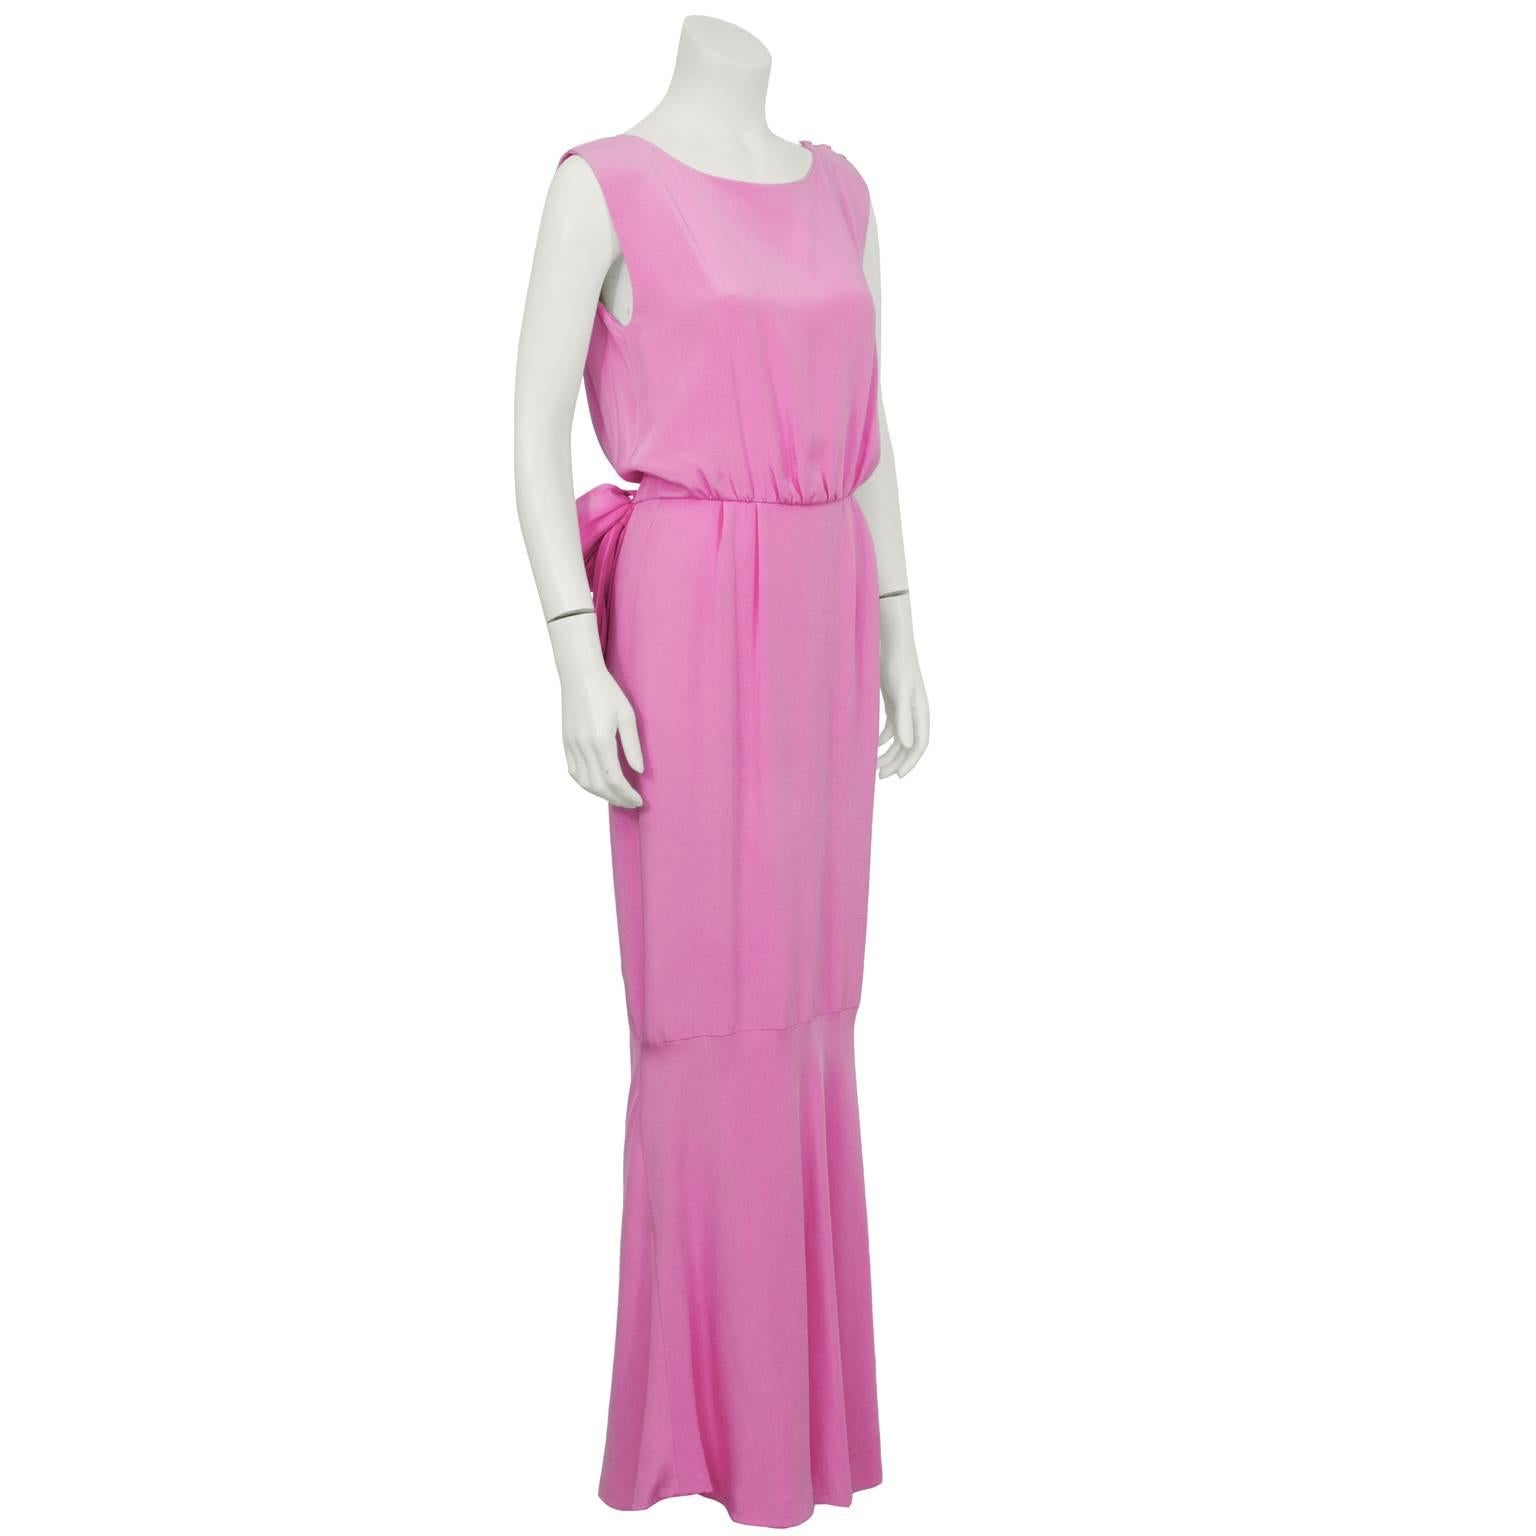 Shocking pink silk evening gown from the 1960's. Gathering at shoulders and natural waist, creating a flattering silhouette. The front is simple with a high neckline, the back has a low cross over V neck detail with a bow and tulip style overlay on